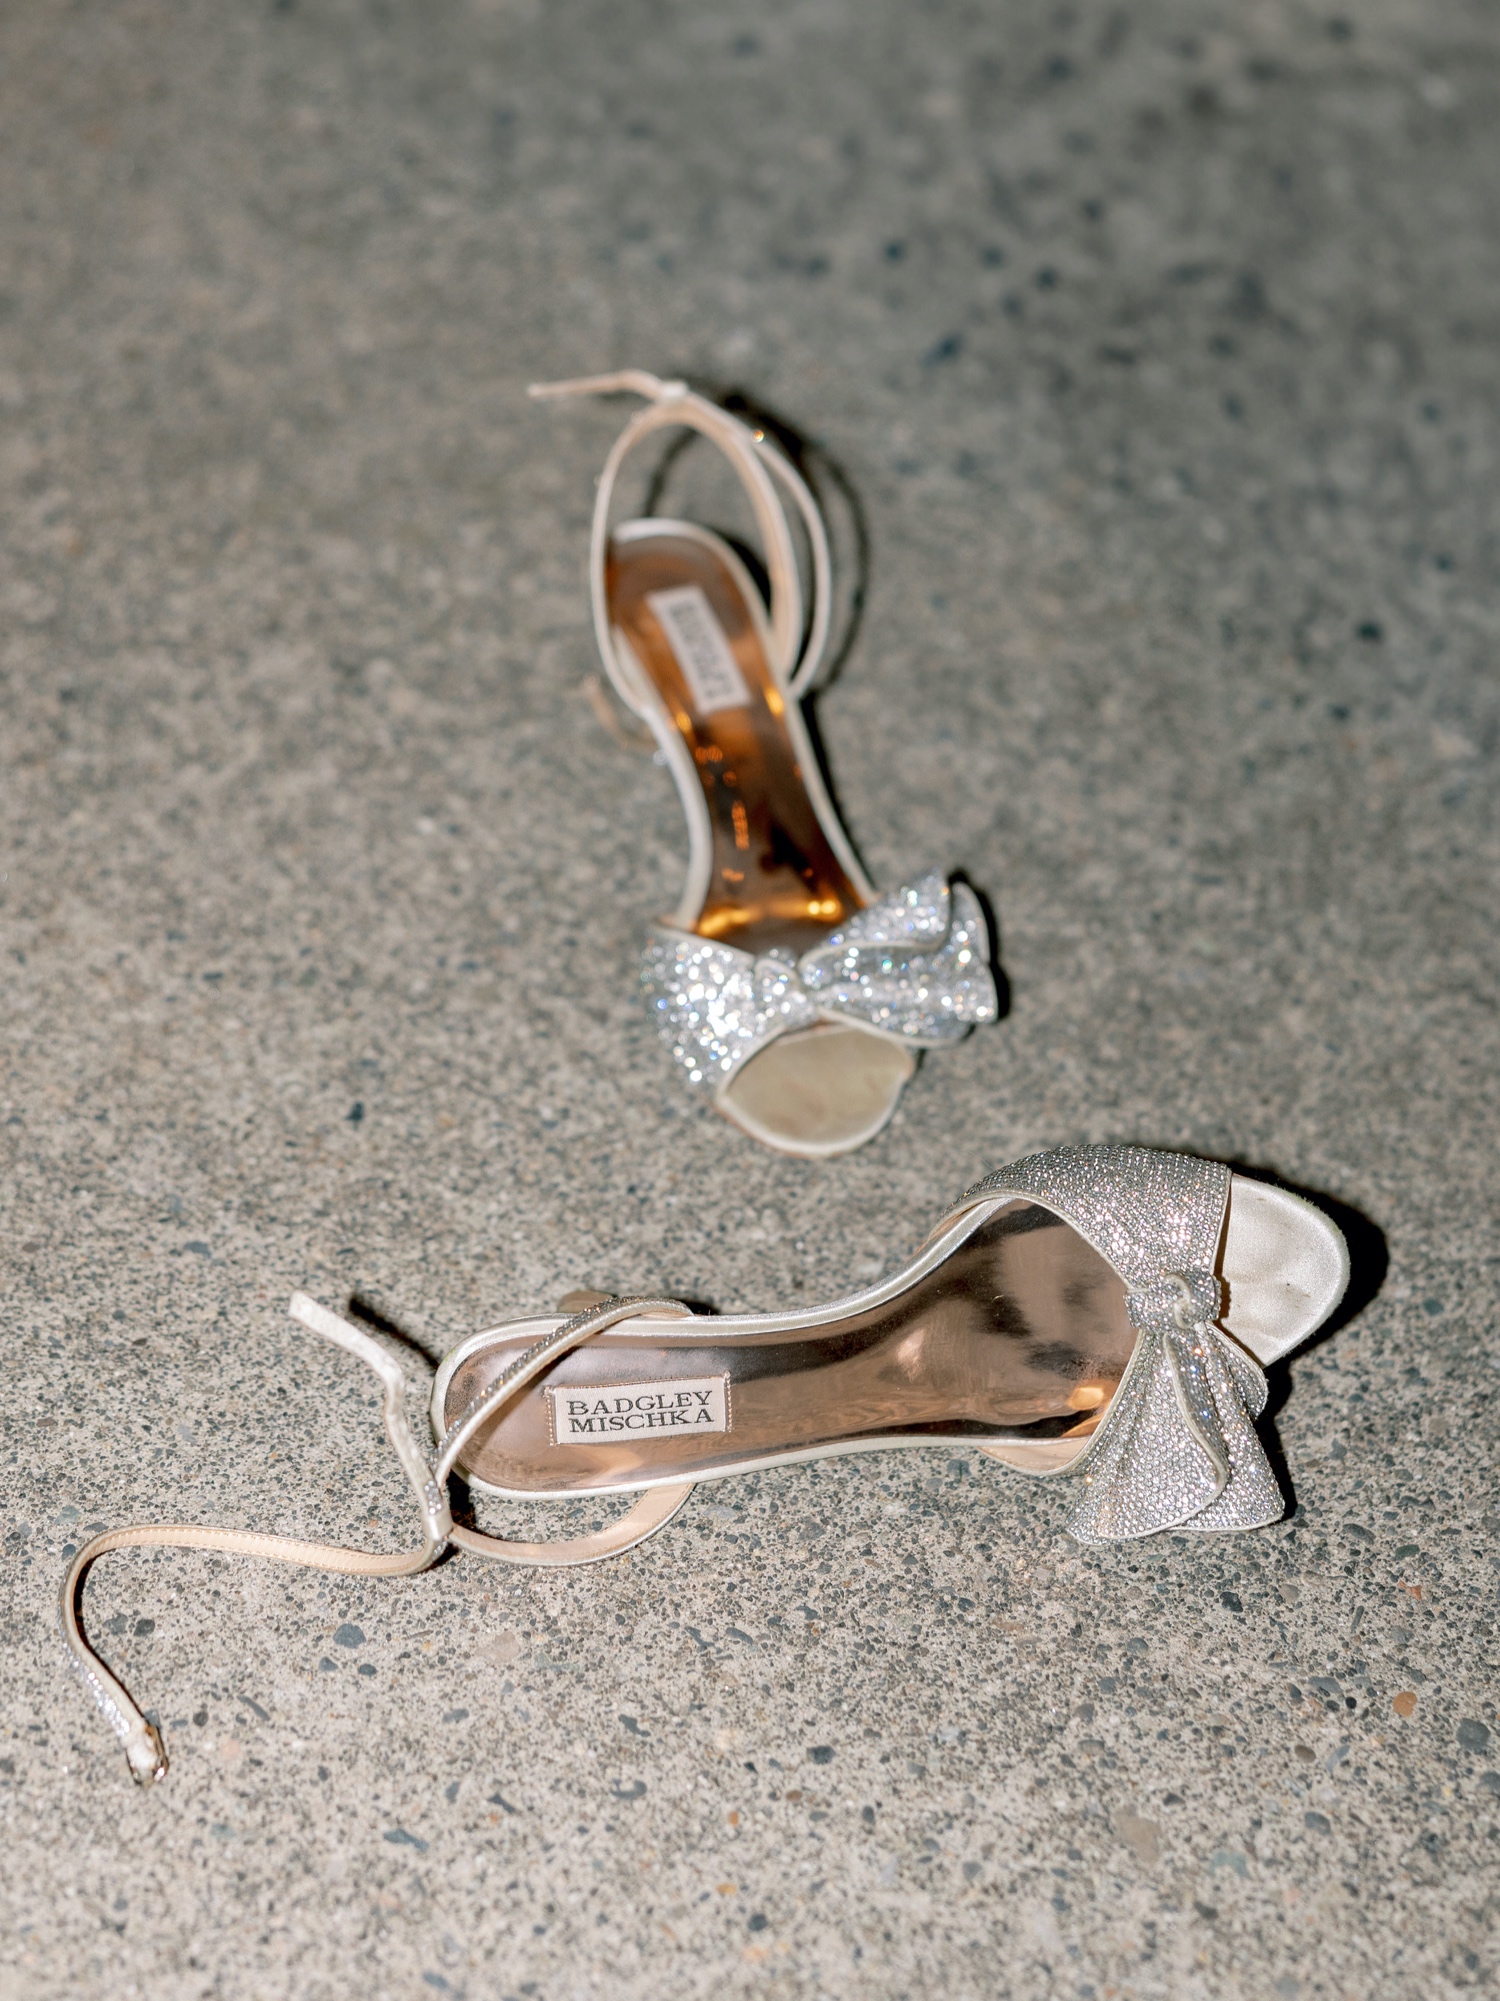 bridal shoes on the floor during wedding reception at abeja winery